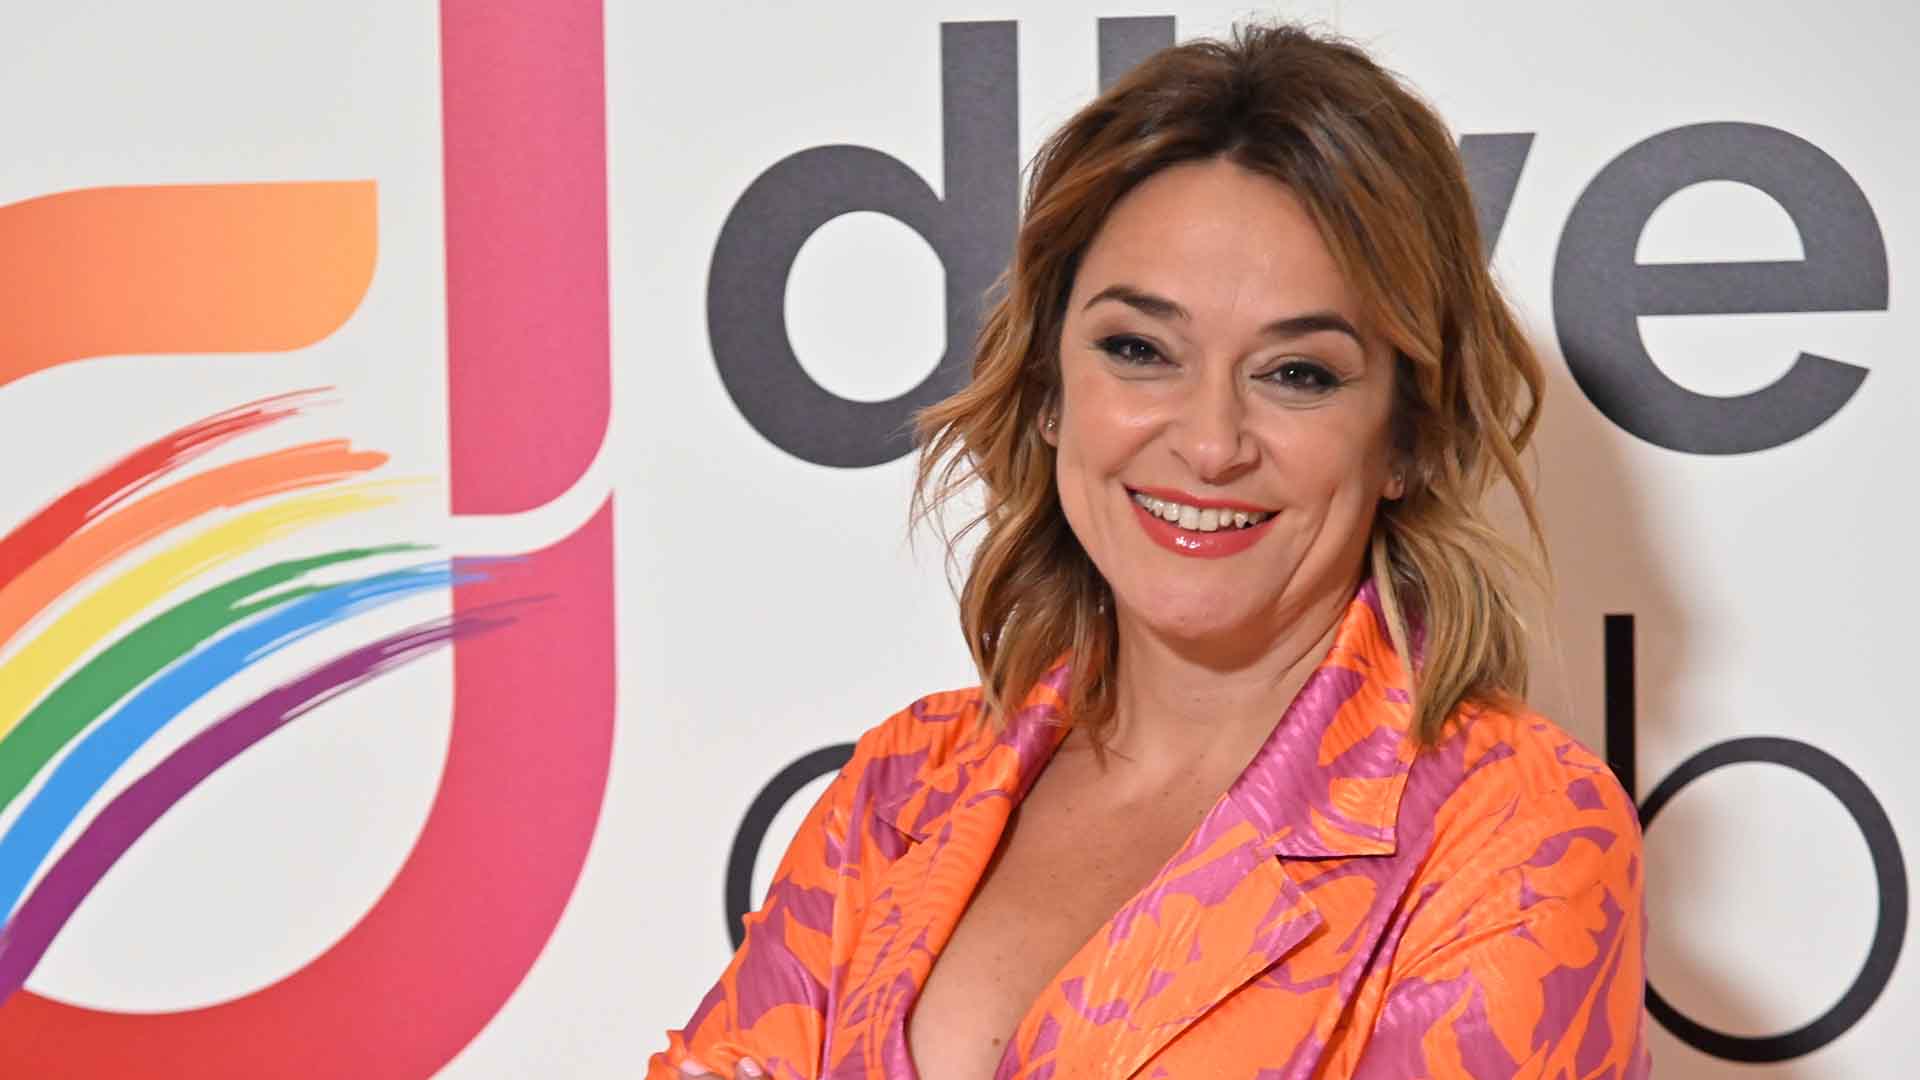 Presenter ToÃ±i Moreno at the photocall of the Diversa 2022 awards in Madrid on Thursday, June 23, 202